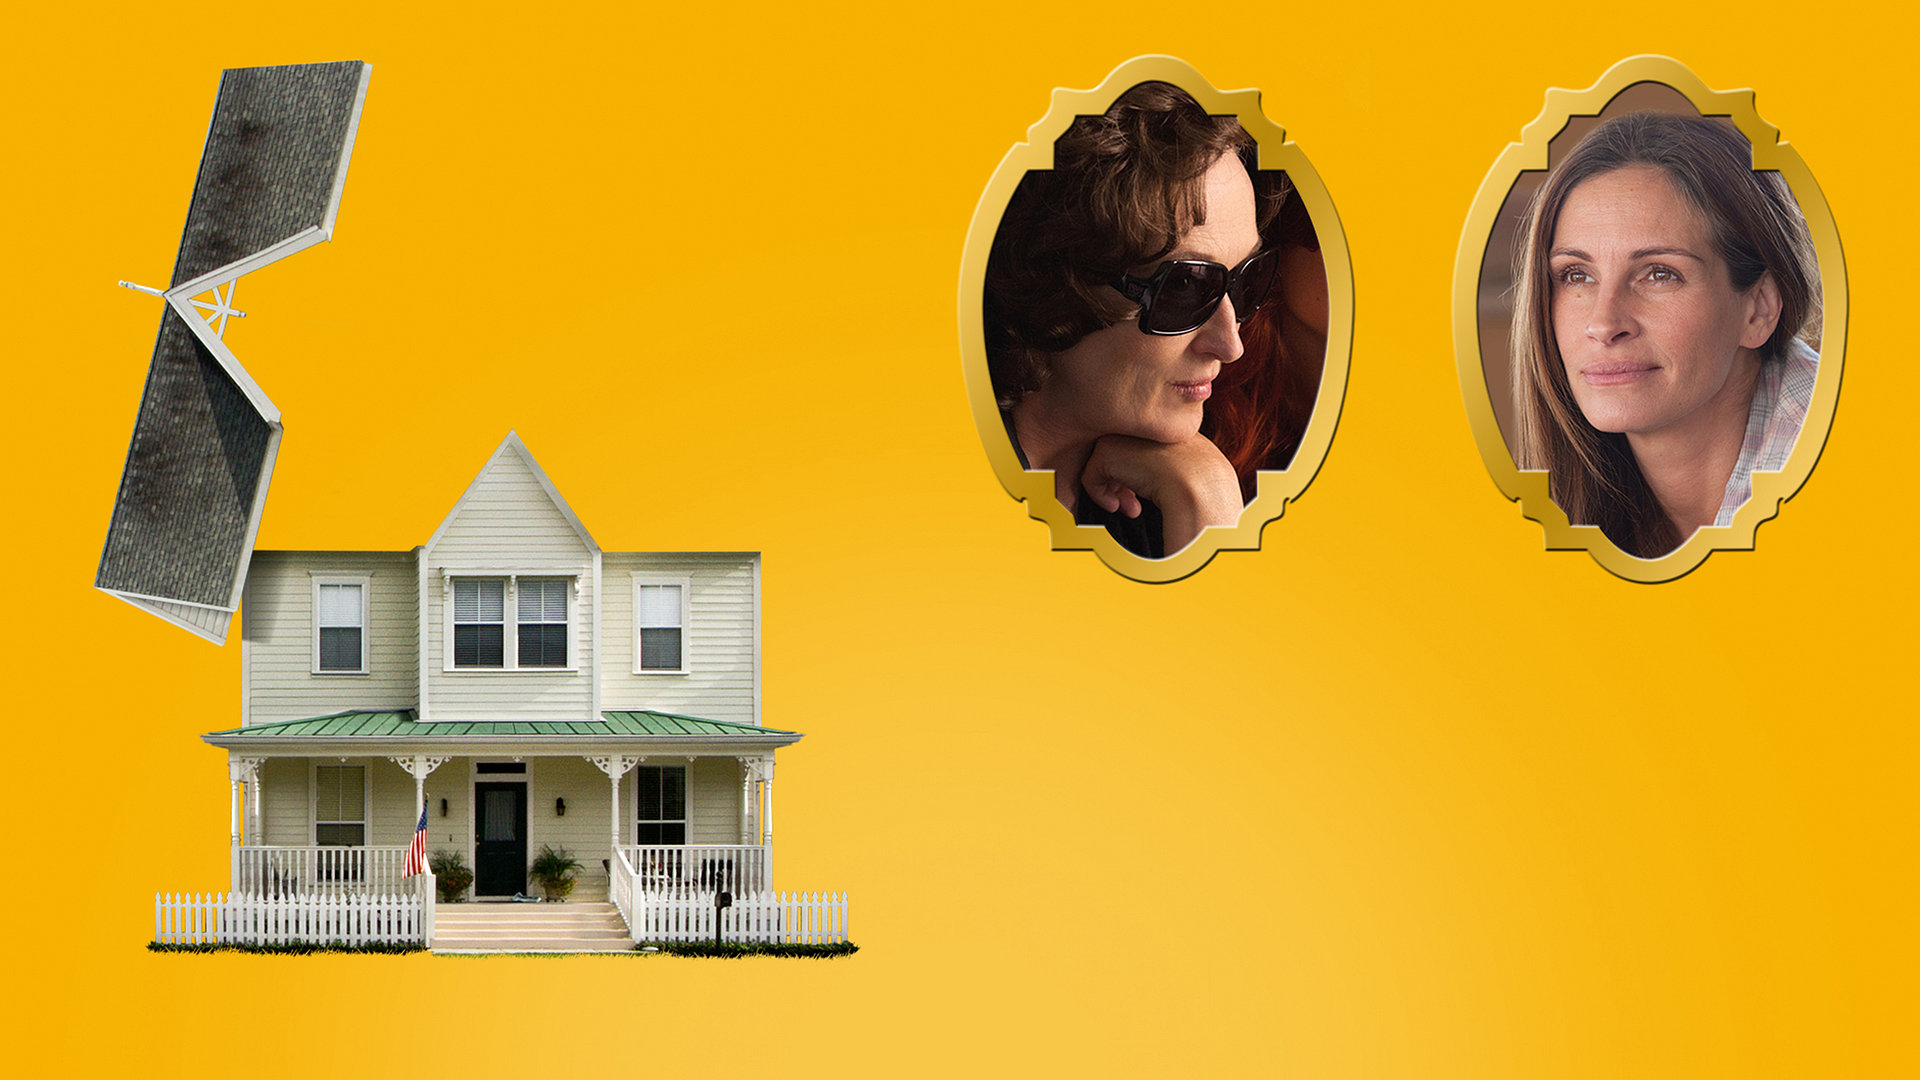 Perhe - August: Osage County